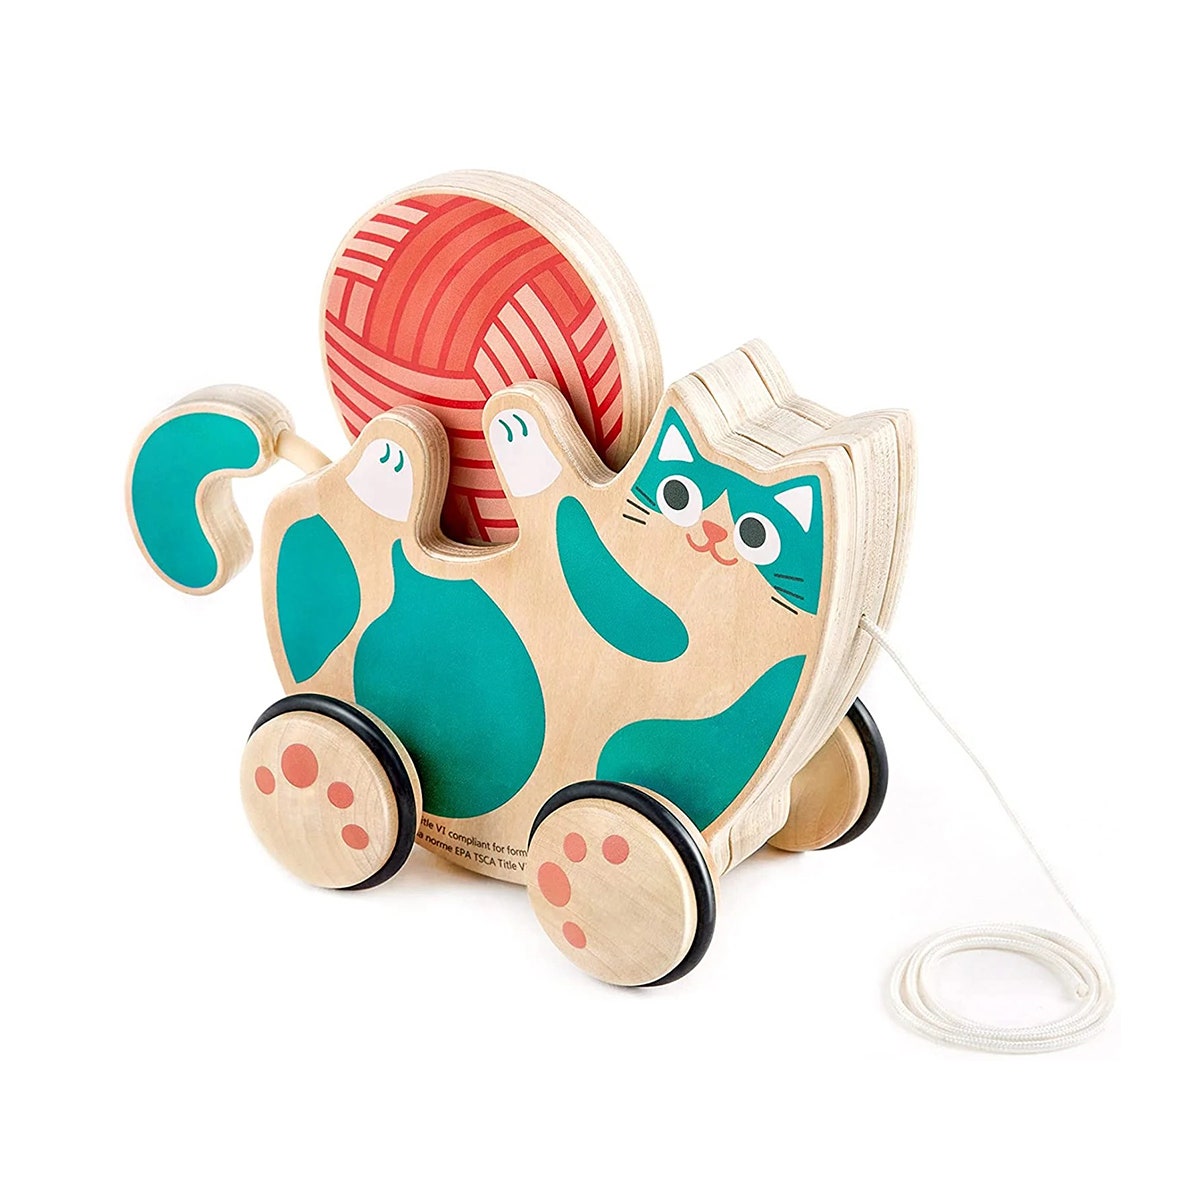 When in doubt, snag a pull toy (that essentially doubles as a push toy) to help encourage movement and coordination. Hape makes a series of animal-themed ones that have hidden talents, like this cat whose yarn ball bobbles up and down with every step. $25, Hape. <a href="https://toys.hape.com/products/e0366">Get it now!</a>